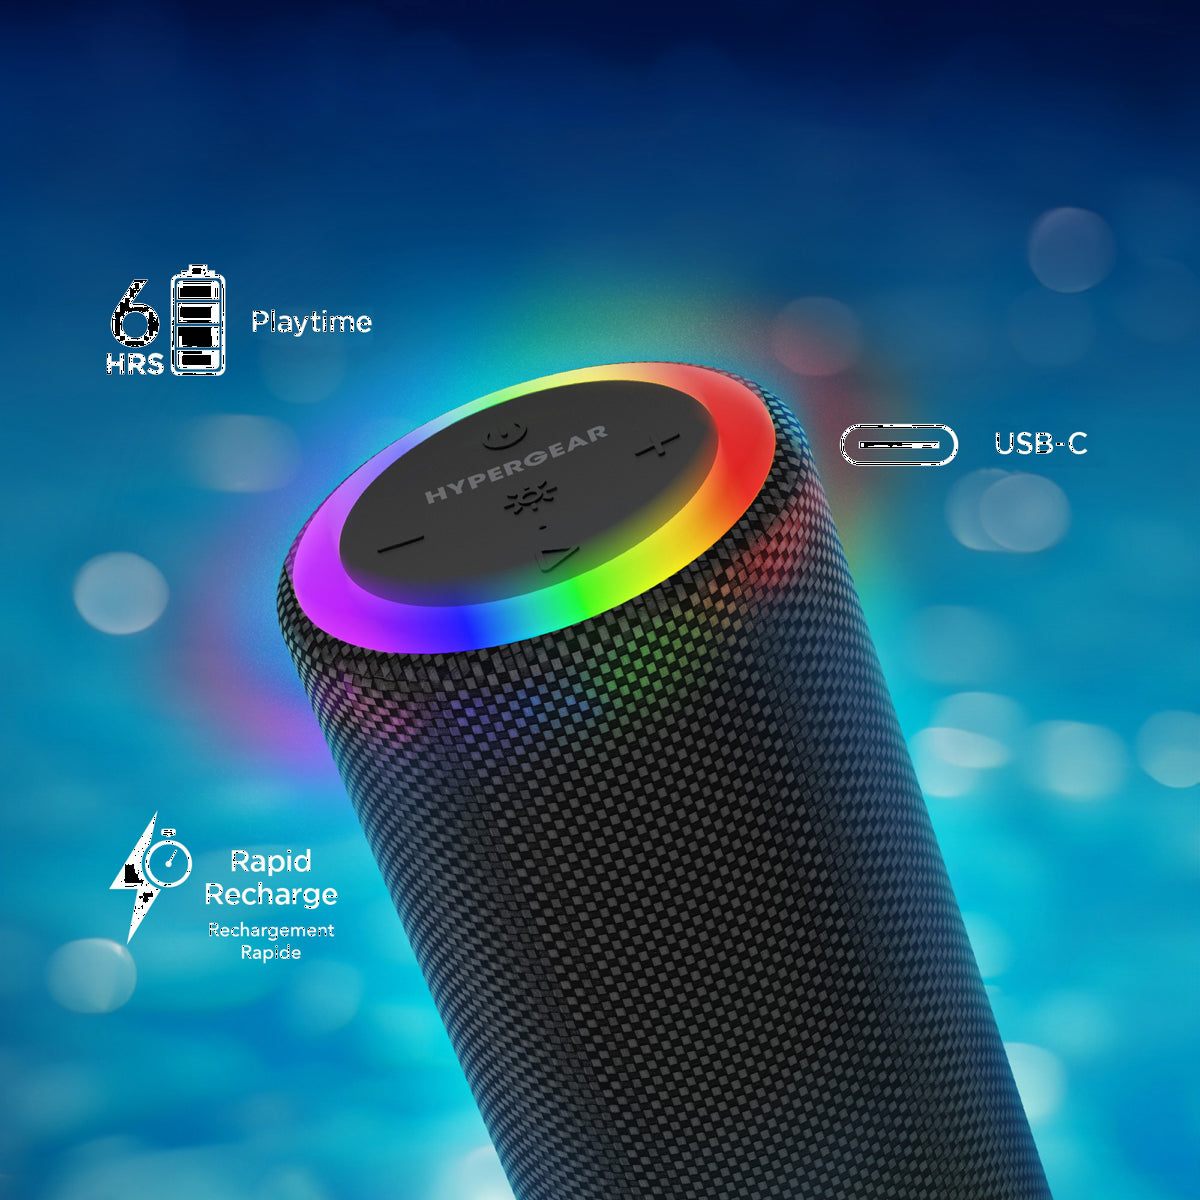 <p>The HyperGear Halo XL Wireless LED Speaker is a waterproof speaker designed with a dynamic multicolour beat-synced light show - perfect for pool parties!</p>